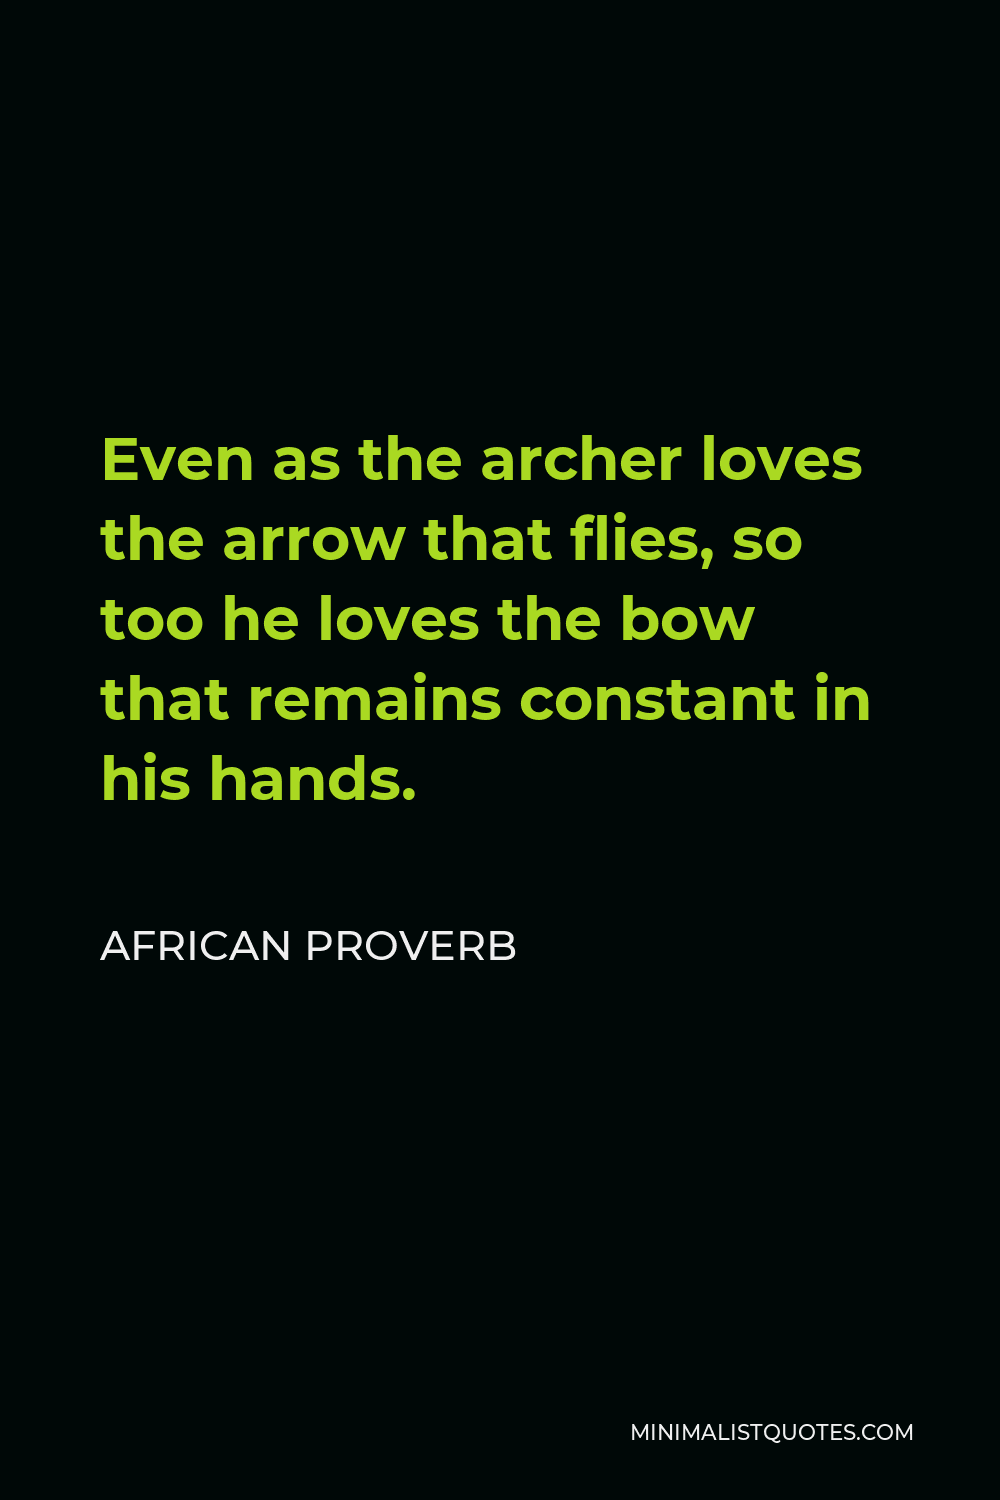 African Proverb Quote - Even as the archer loves the arrow that flies, so too he loves the bow that remains constant in his hands.